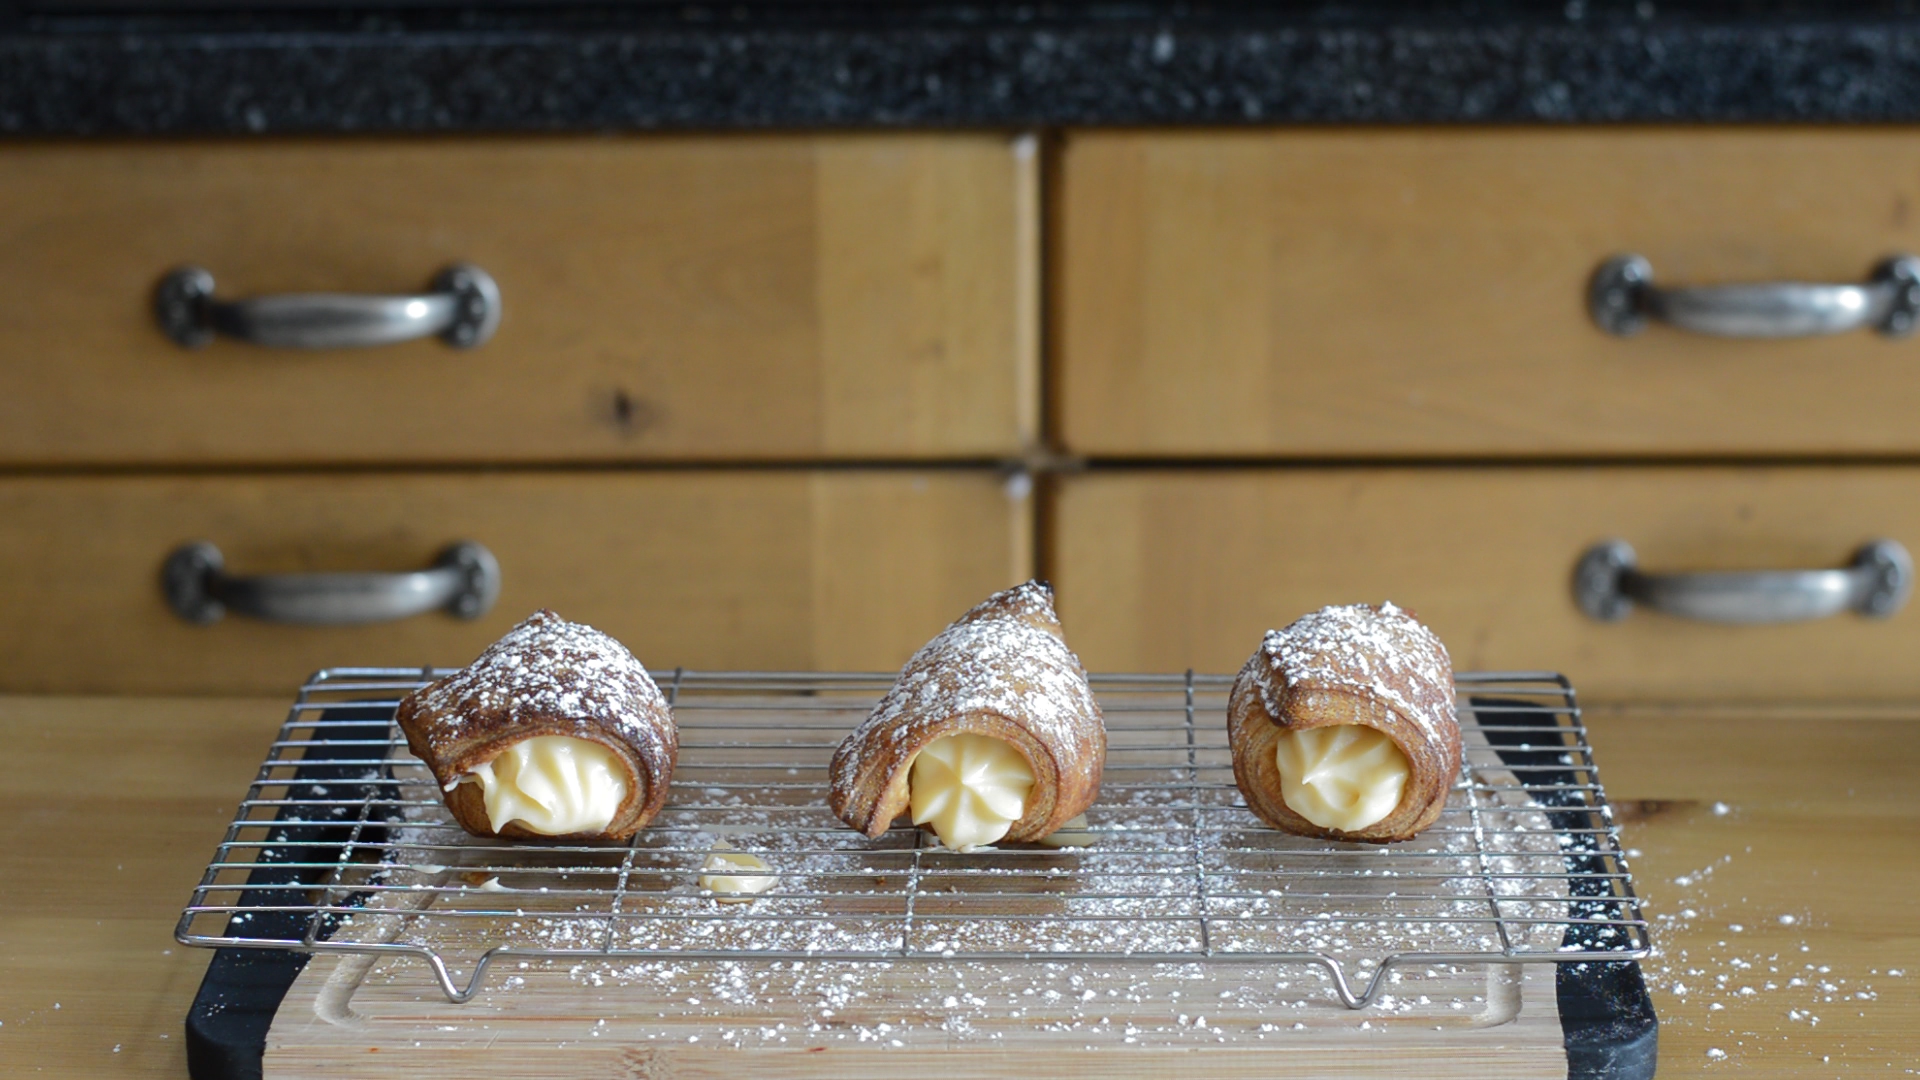 The Croillfeuille: Mille-Feuille-Croissants